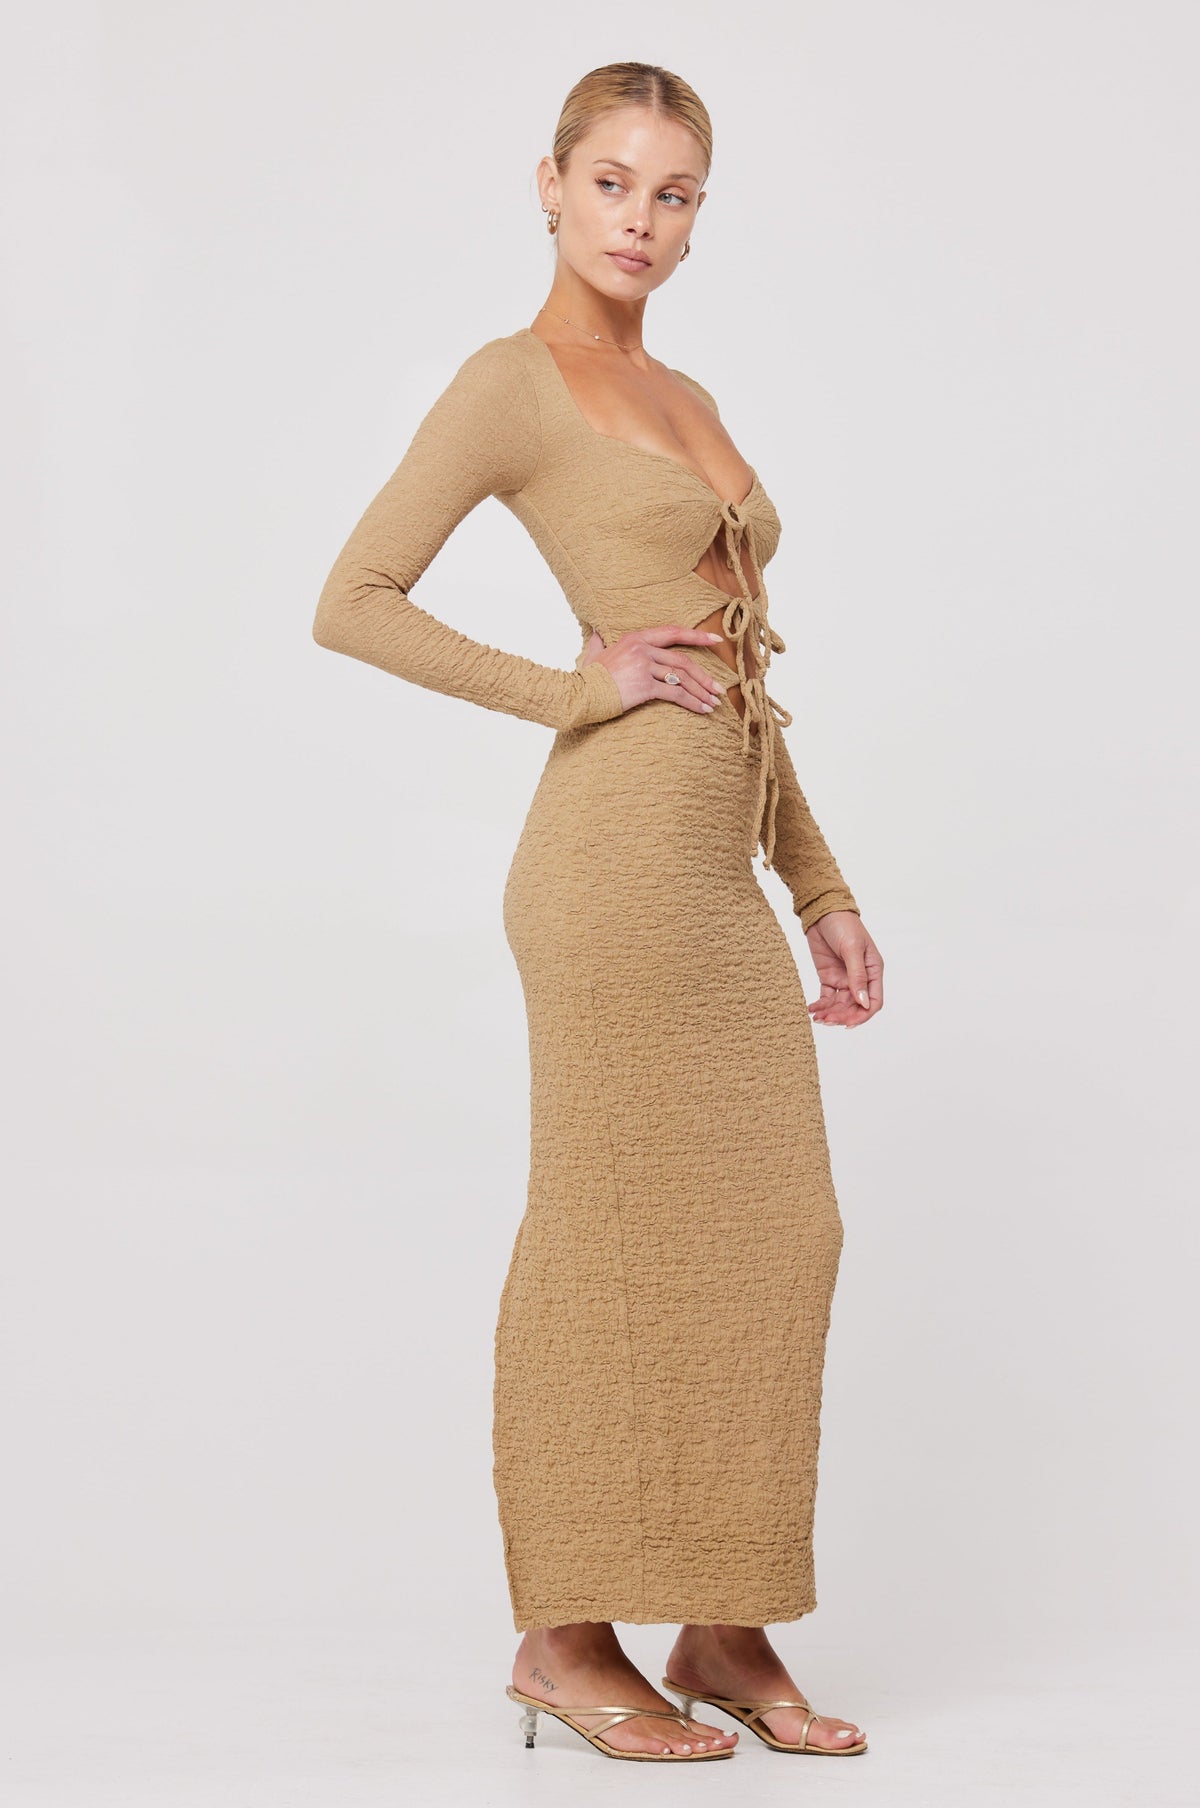 This is an image of Simone Dress in Moss - RESA featuring a model wearing the dress